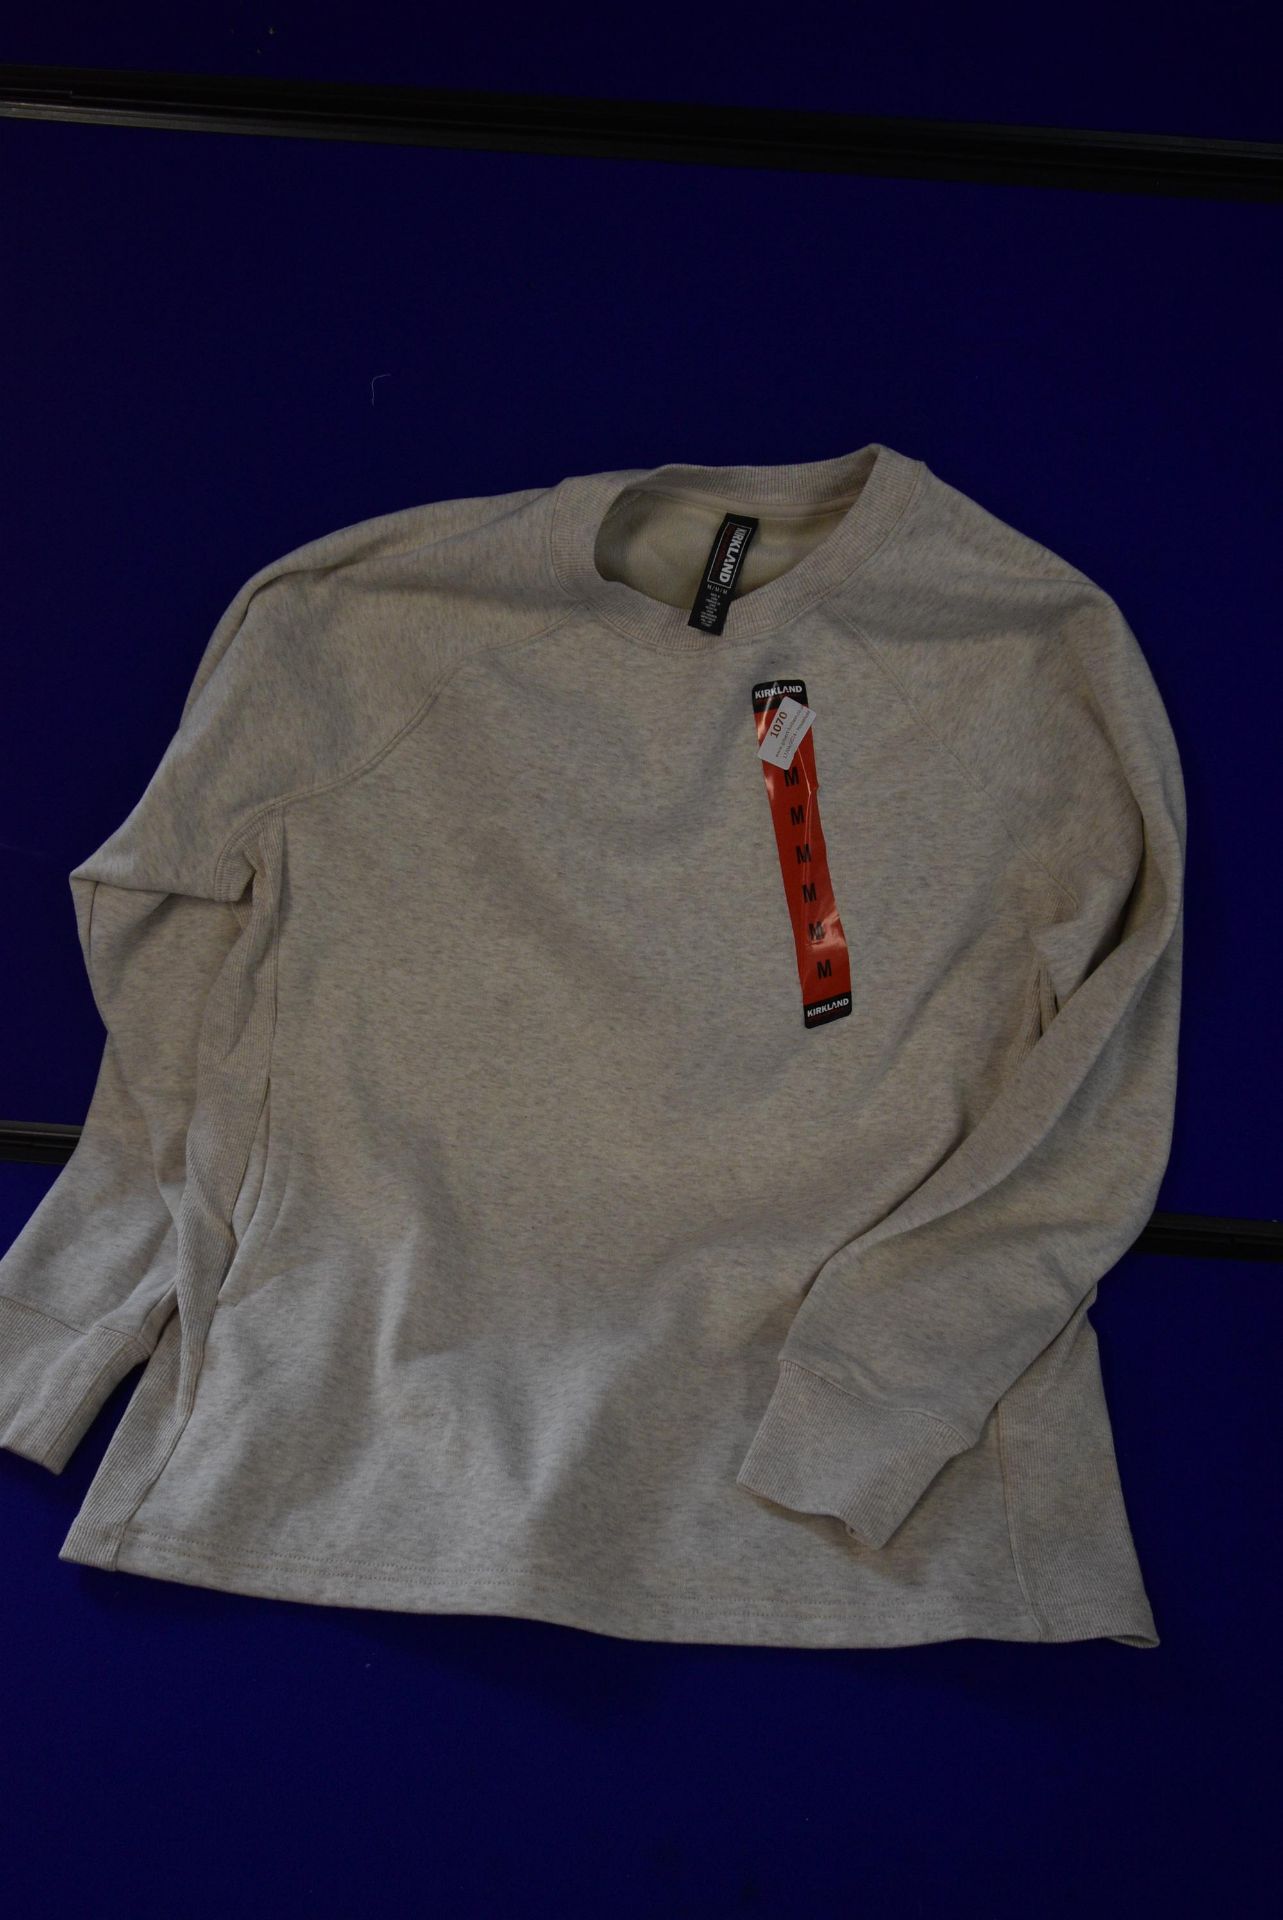 *Kirkland Signature Long Sleeve Top in Oatmeal Size: M